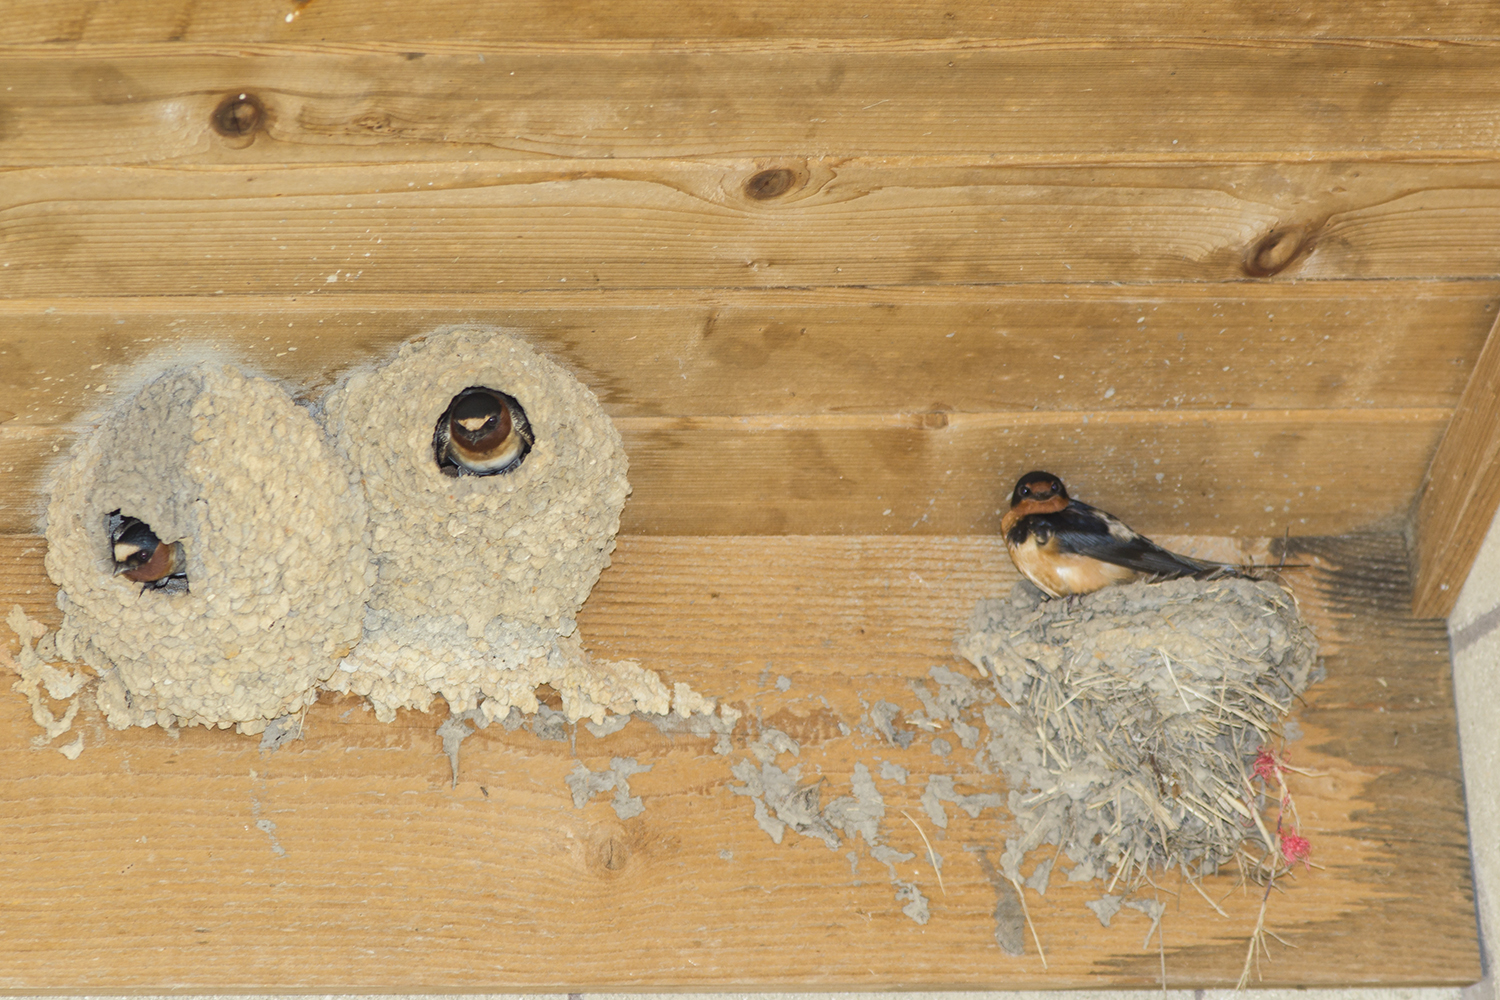 Nesting swallows are masters of construction